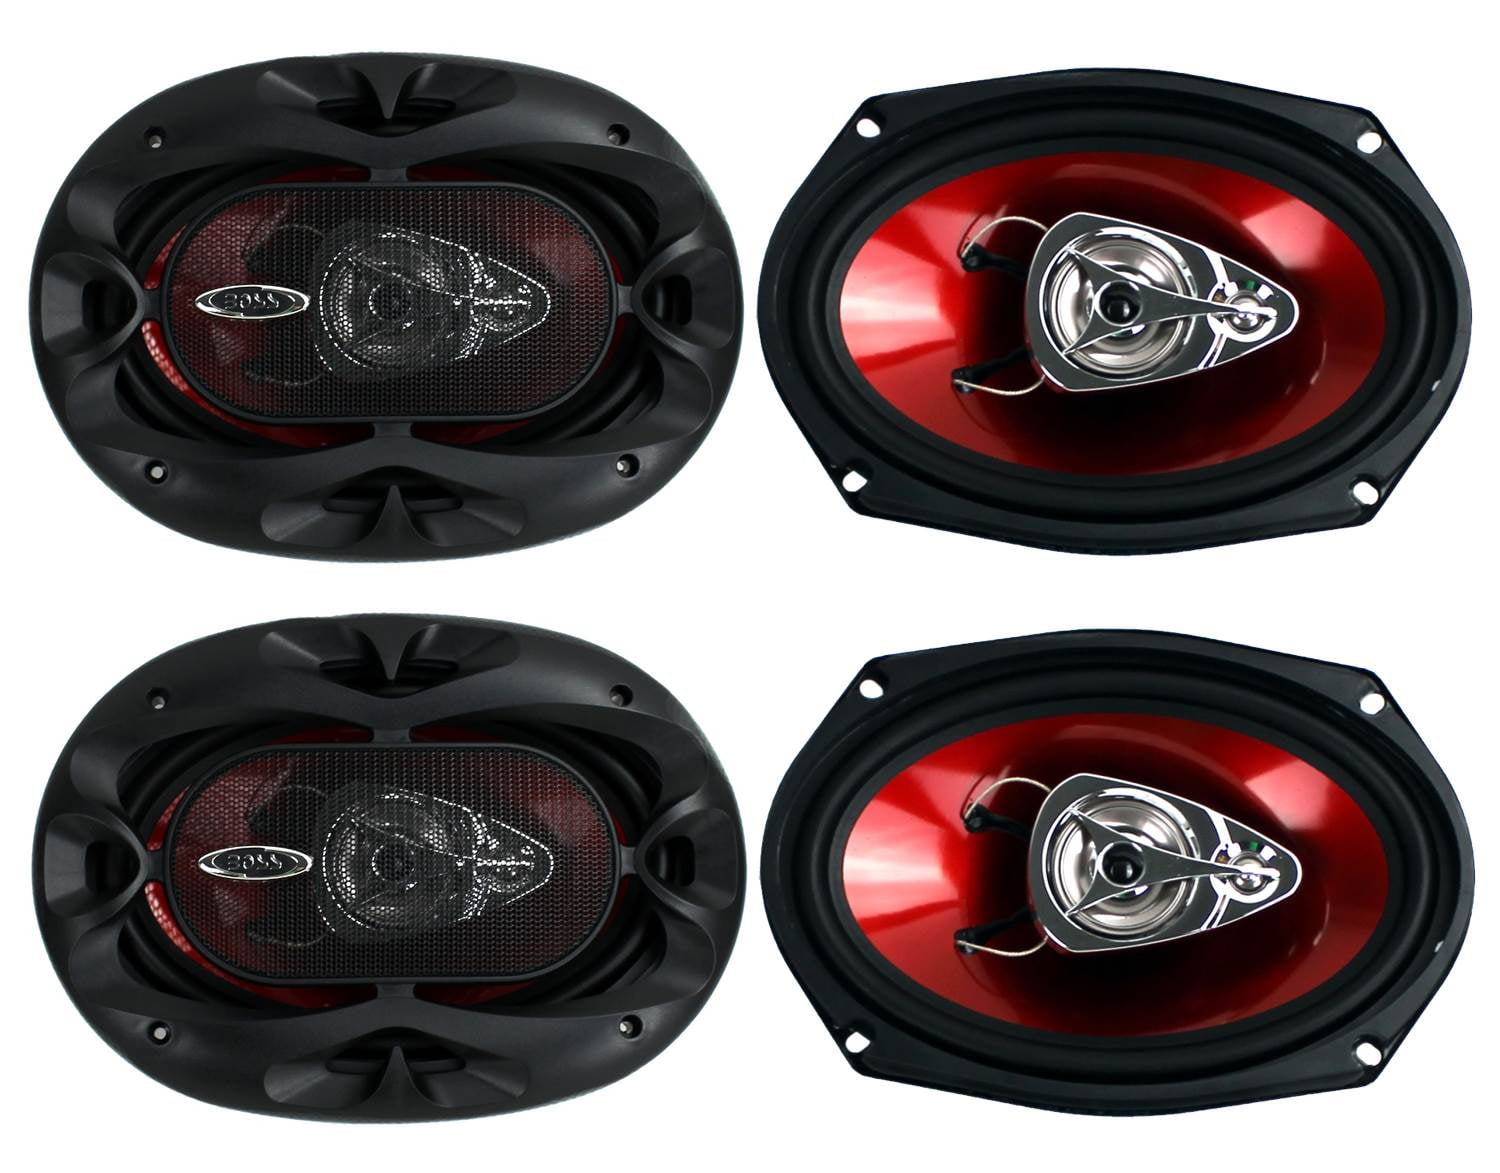 4 New BOSS CH6930 6x9" 400W 3-Way Car Coaxial Audio Stereo Speakers Red 